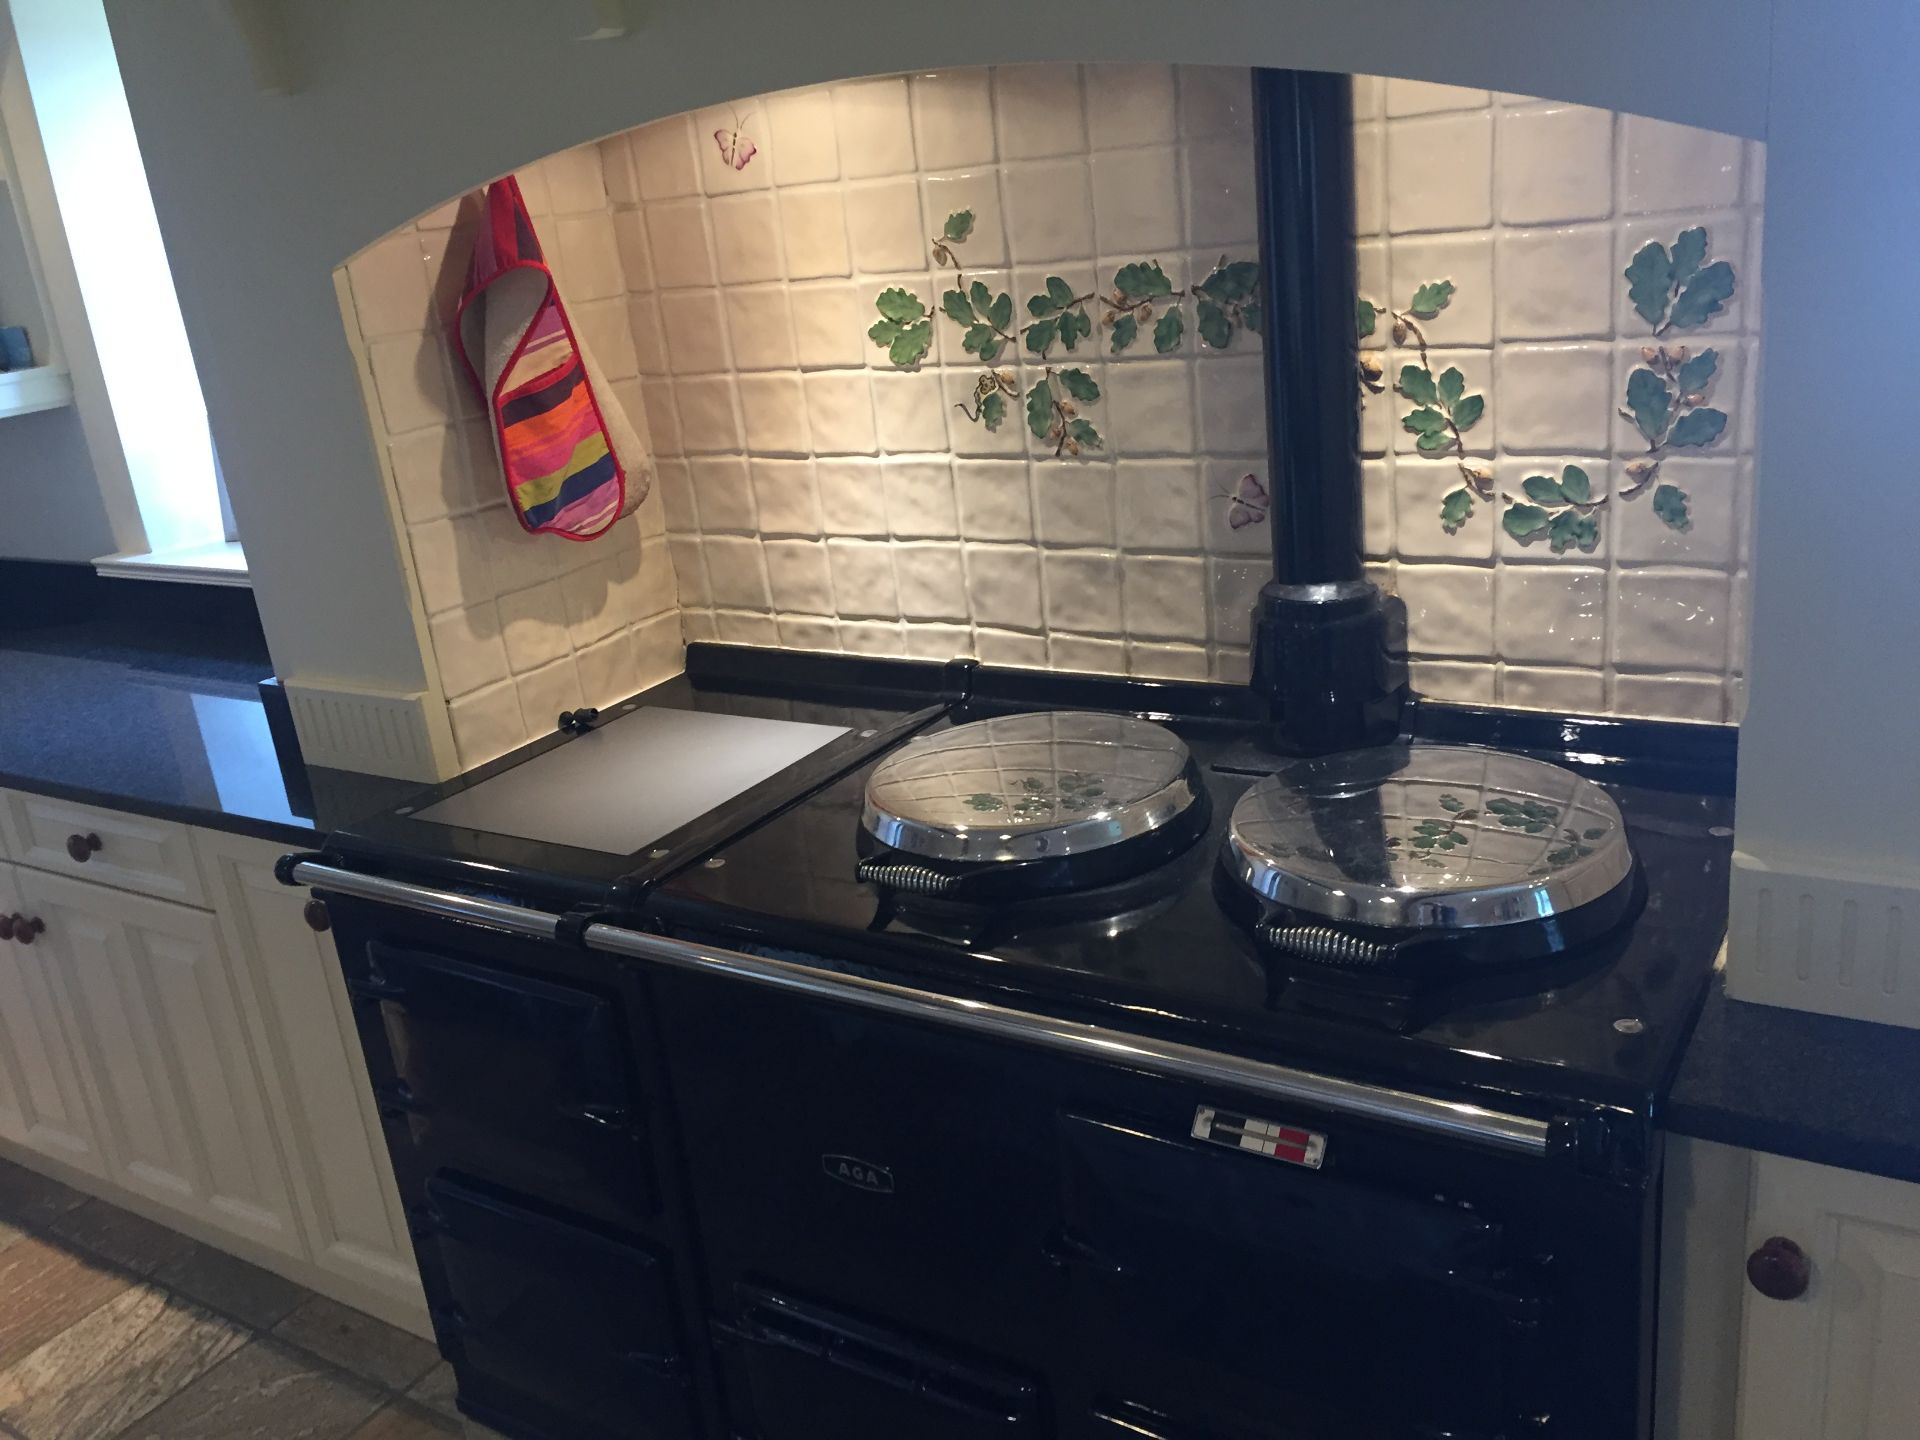 1 x Aga 4-Oven, 3-Plate Dual-Fuel Range Cooker - Cast Iron With Navy Enamel Finish With A Black Top - Image 21 of 21